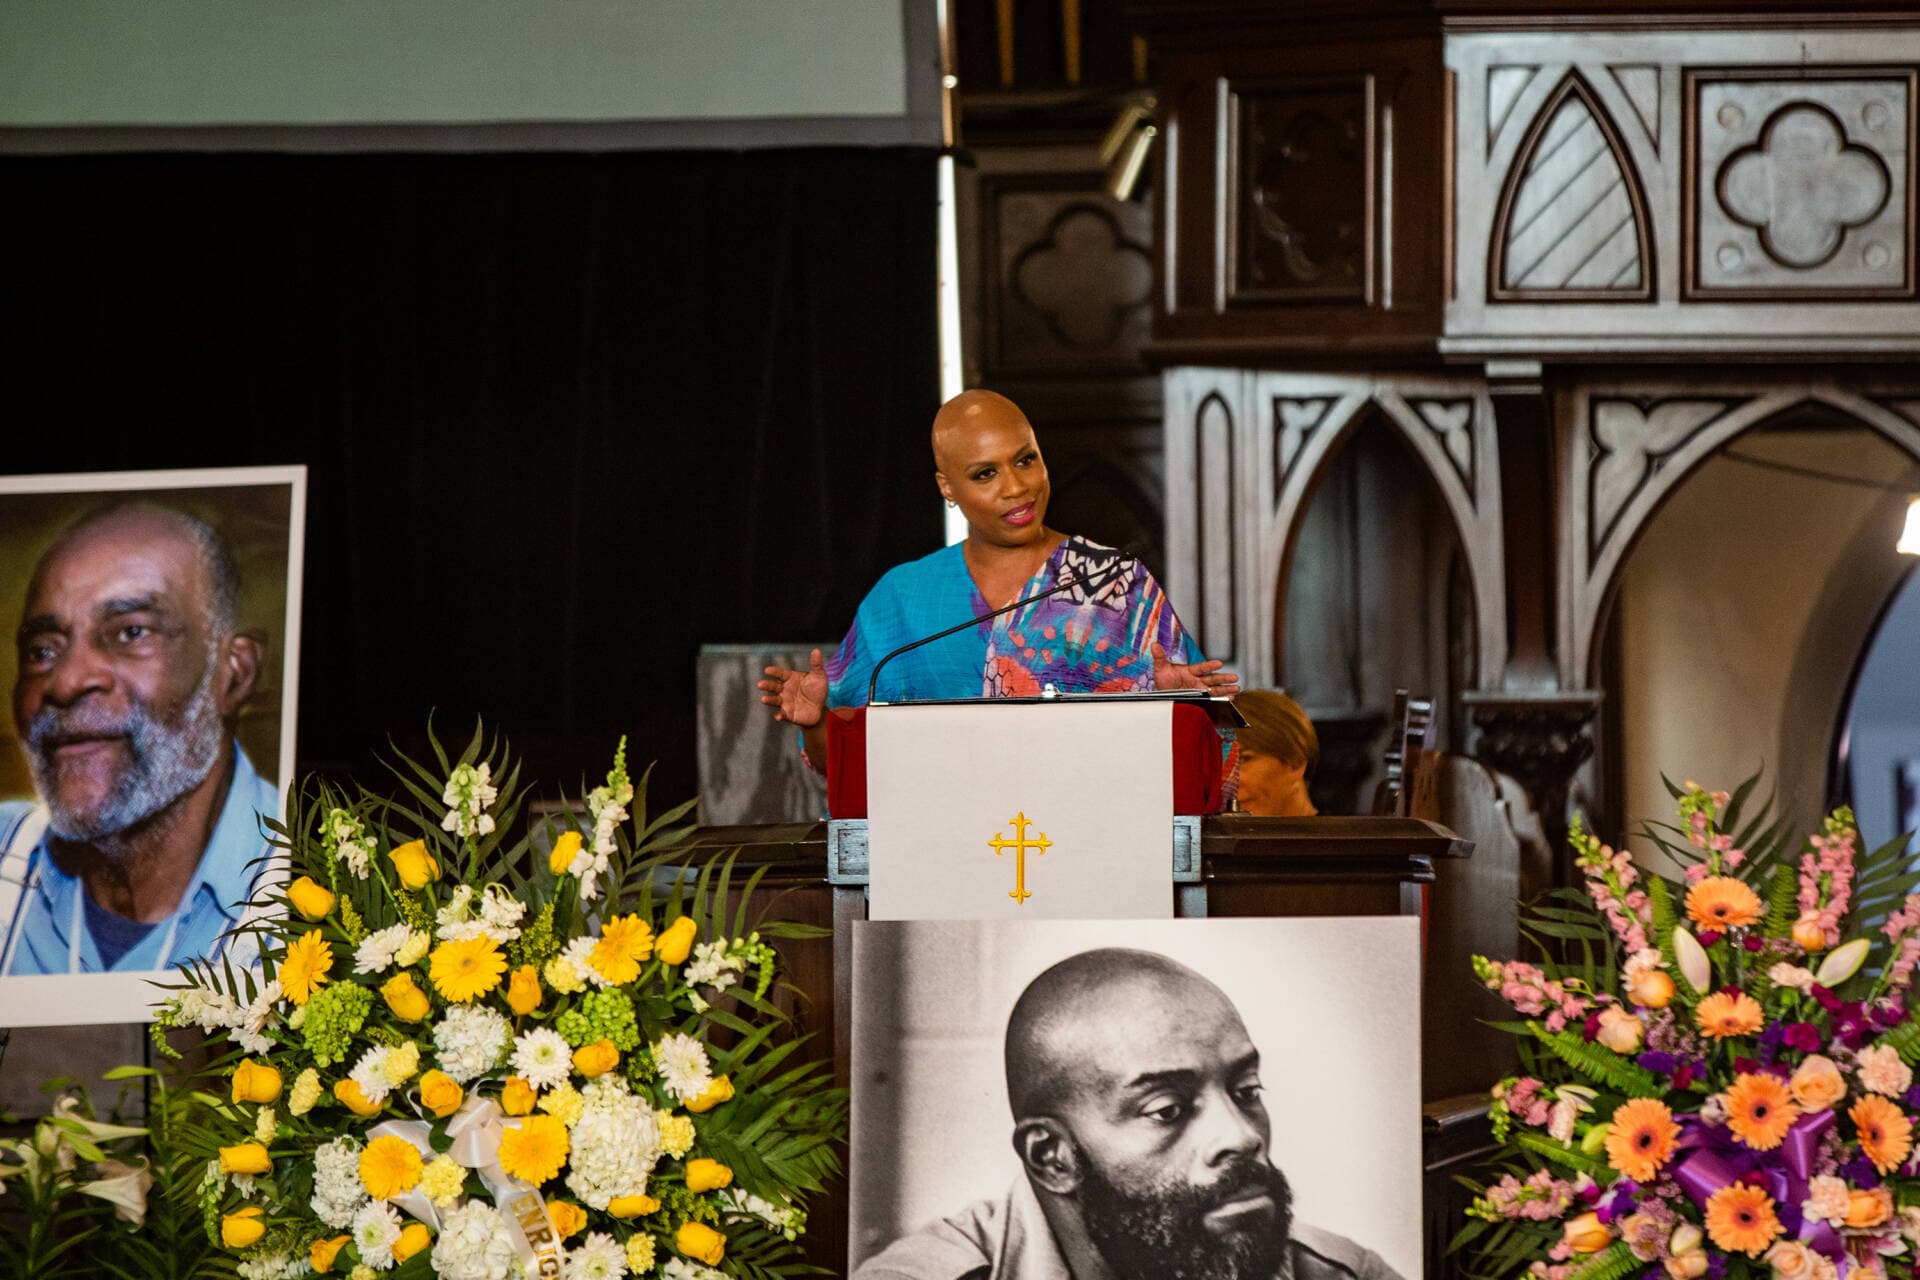 U.S. Rep. Ayanna Pressley speaks during the funeral service of Mel King at Union United Methodist Church in the South End. (Jesse Costa/WBUR)